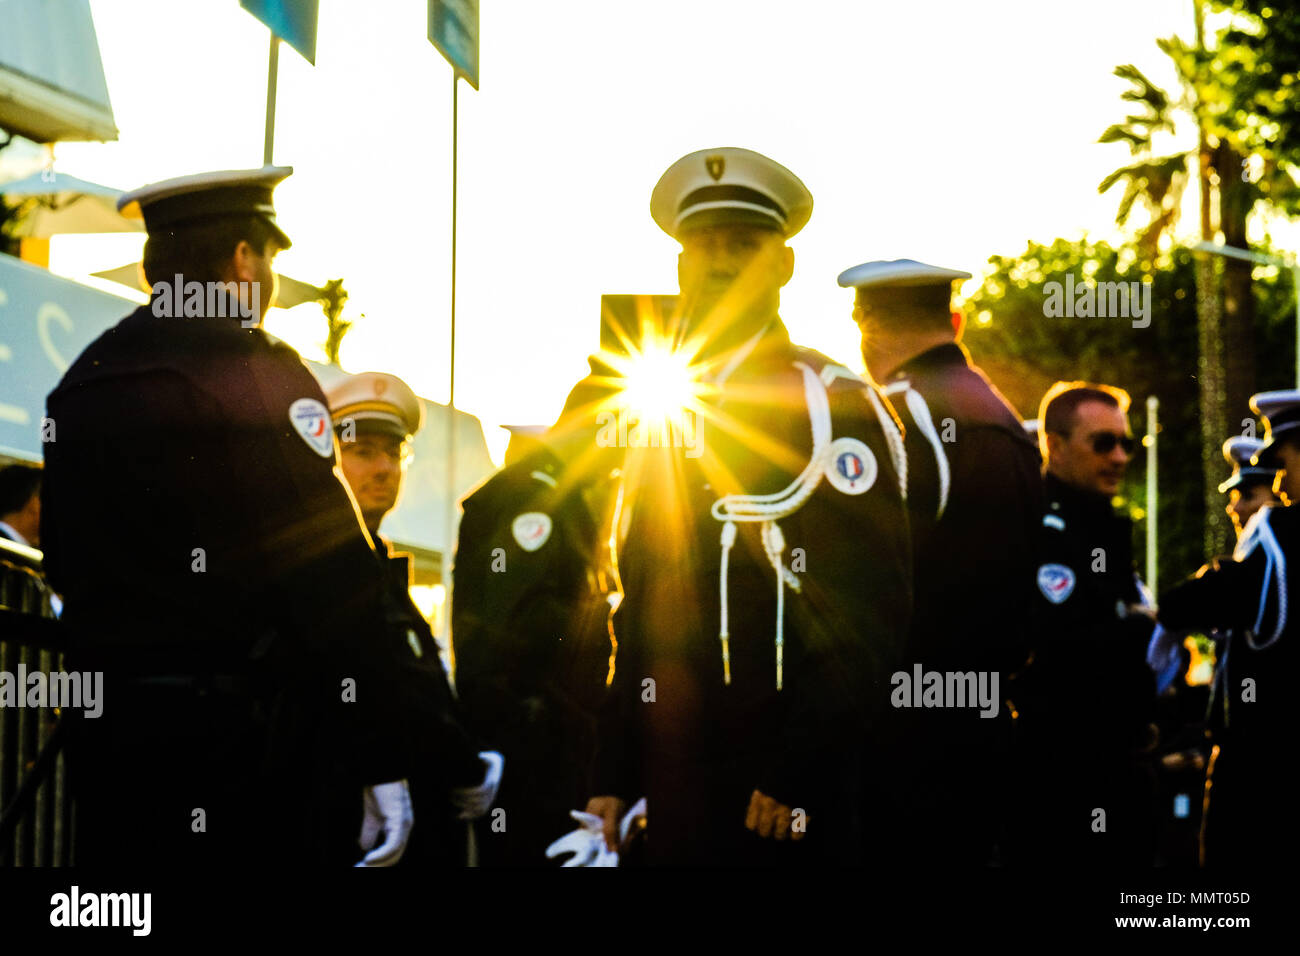 Cannes, France. 12th May 2018. Atmosphere at Palais des Festivals on Saturday 12 May 2018 during the 71st Cannes Film Festival held at Palais des Festivals, Cannes. Pictured: Police officers in the evening light. Picture by Julie Edwards/LFI/Avalon. Credit: Julie Edwards/Alamy Live News Stock Photo